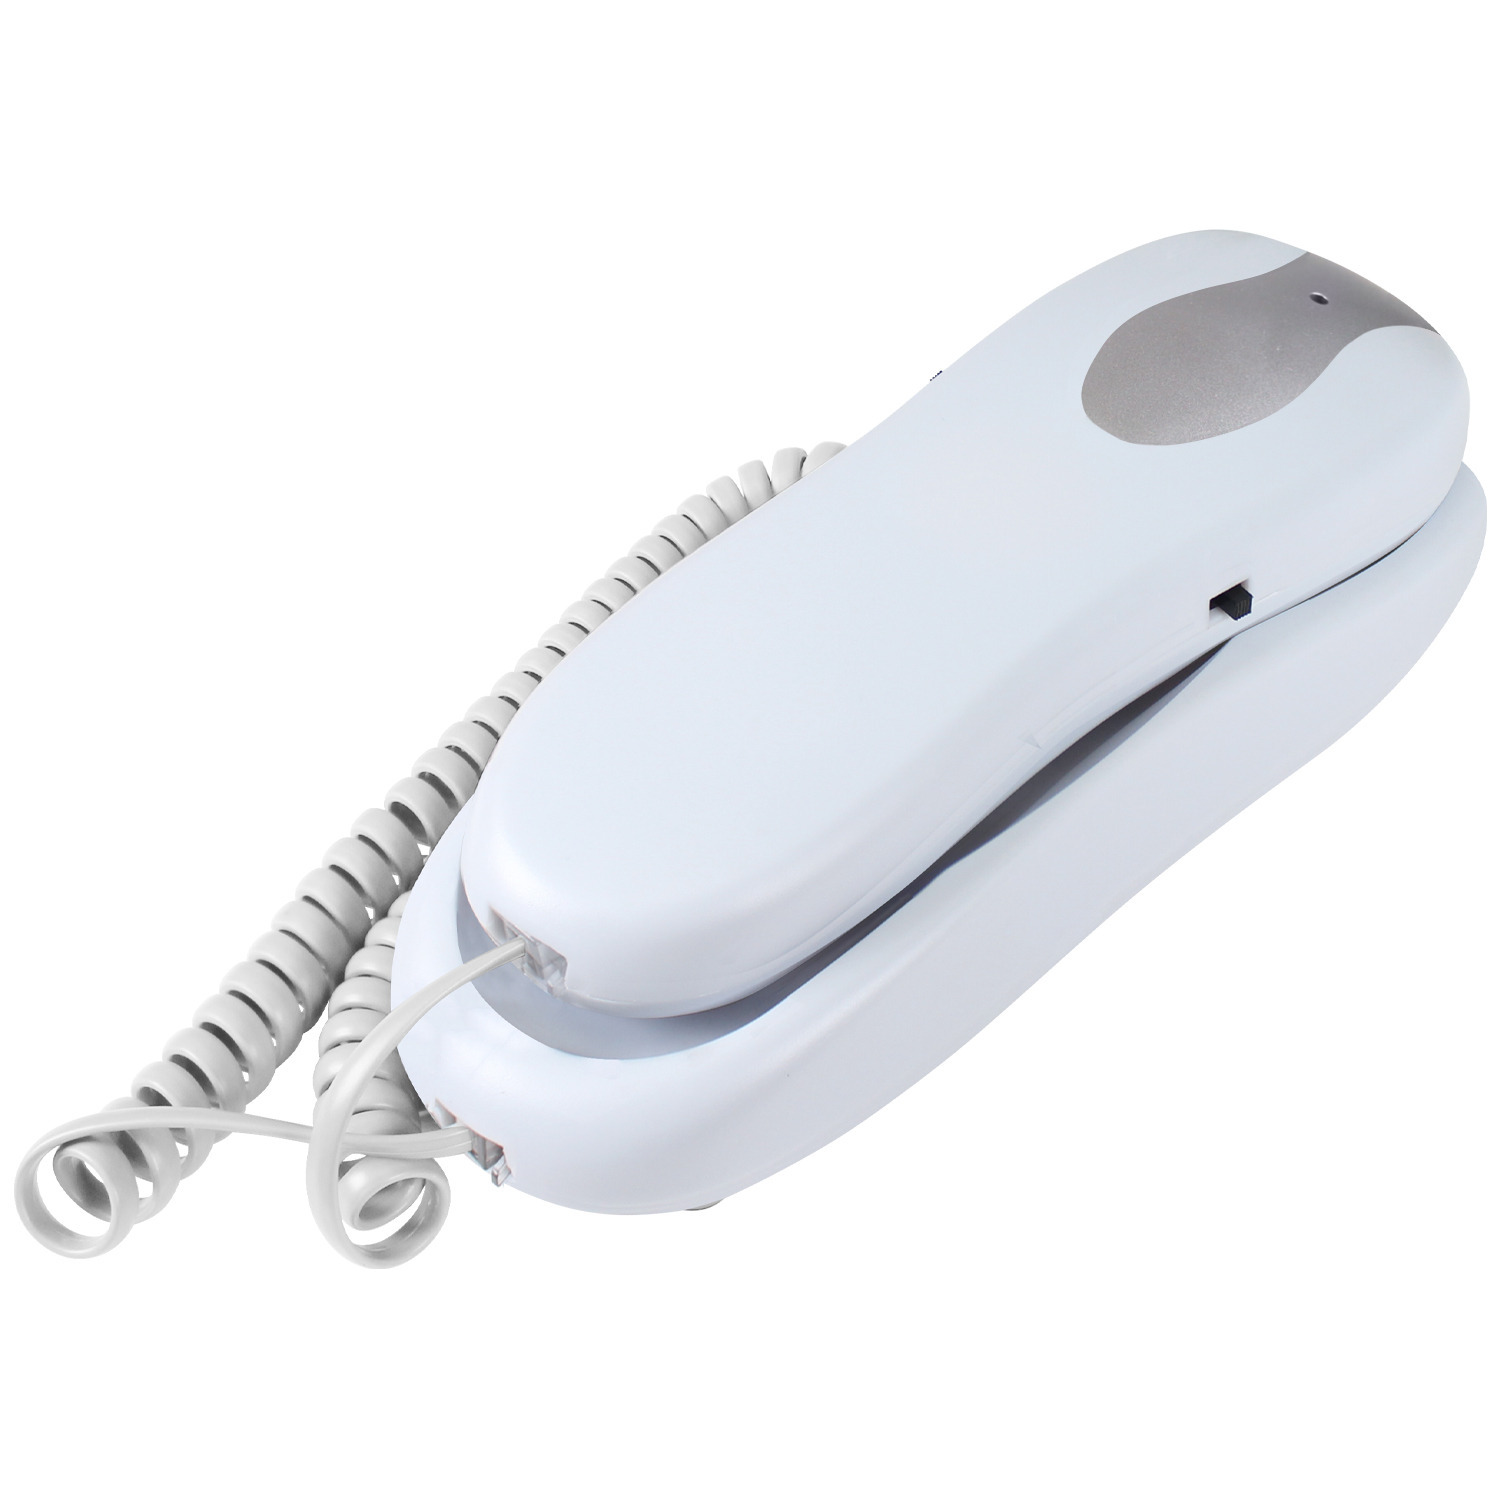 Slimline White Colored Phone For Wall Or Desk With Memory